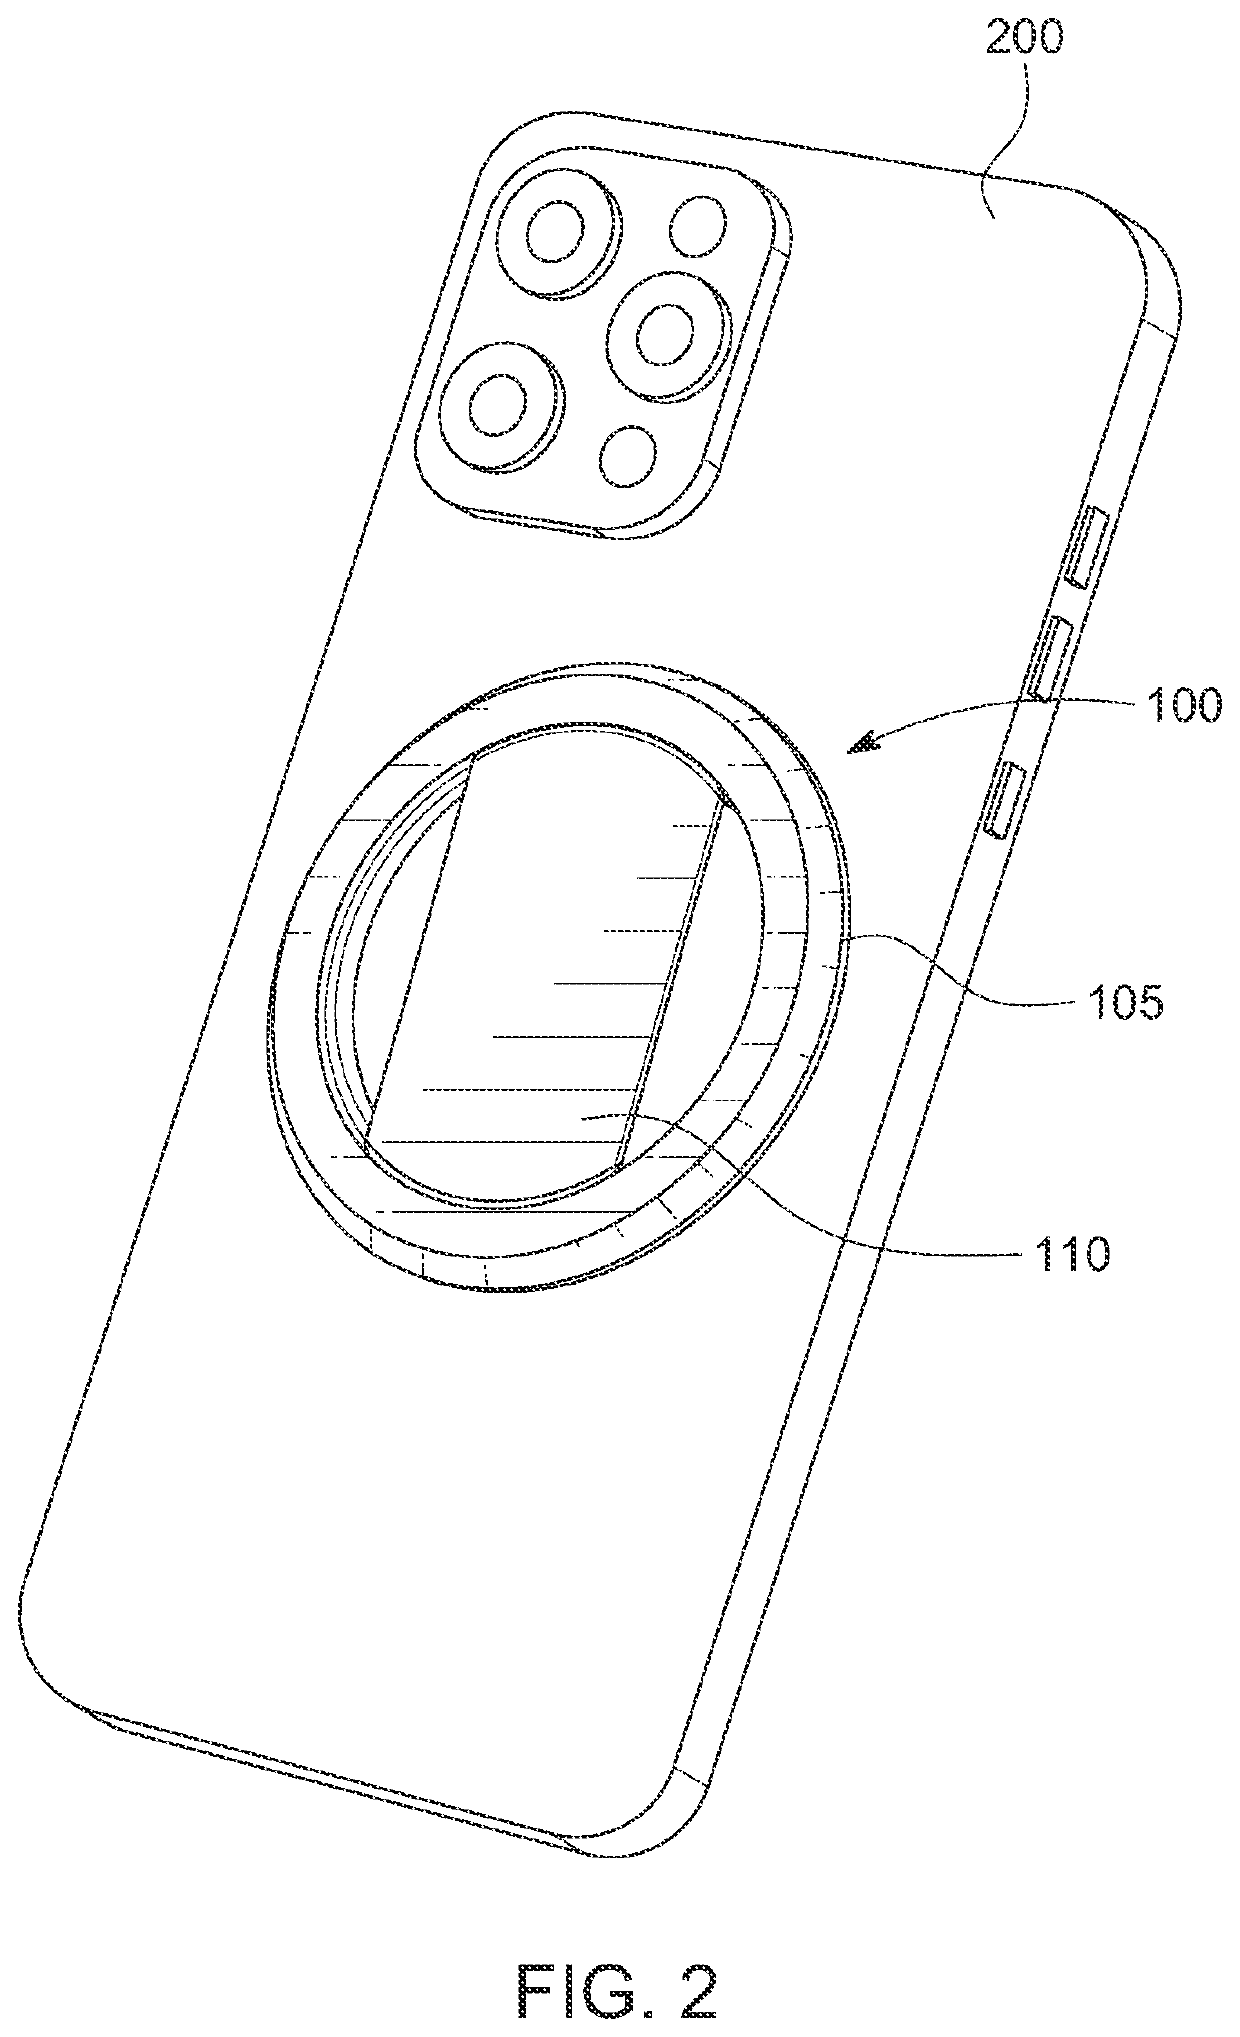 Magnetically connectable grip and connector for electronics